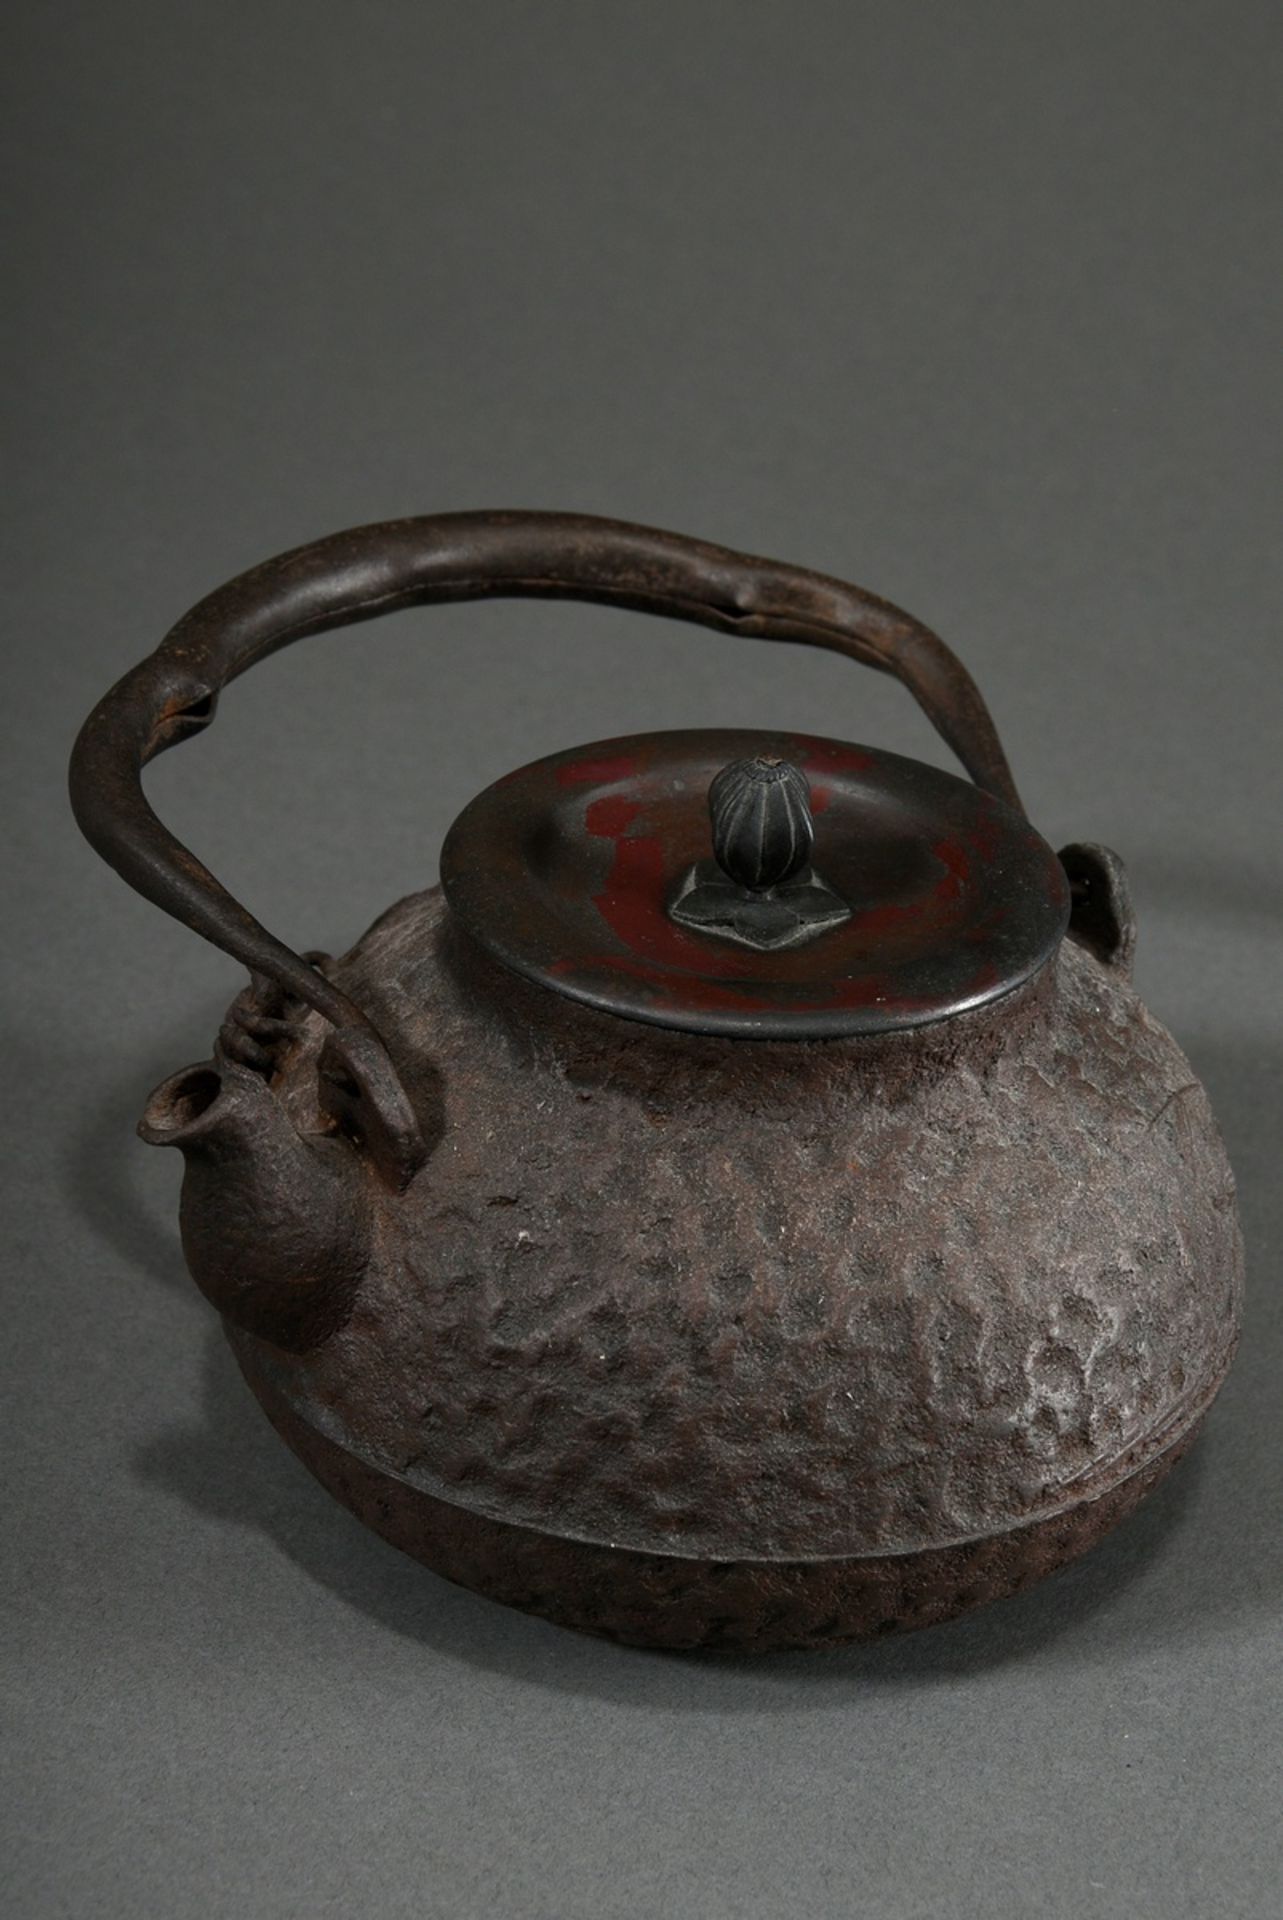 Iron Tetsubin water kettle "Two crabs and sedge", bronze lid signed inside, Japan 19th/20th c., h. - Image 4 of 9